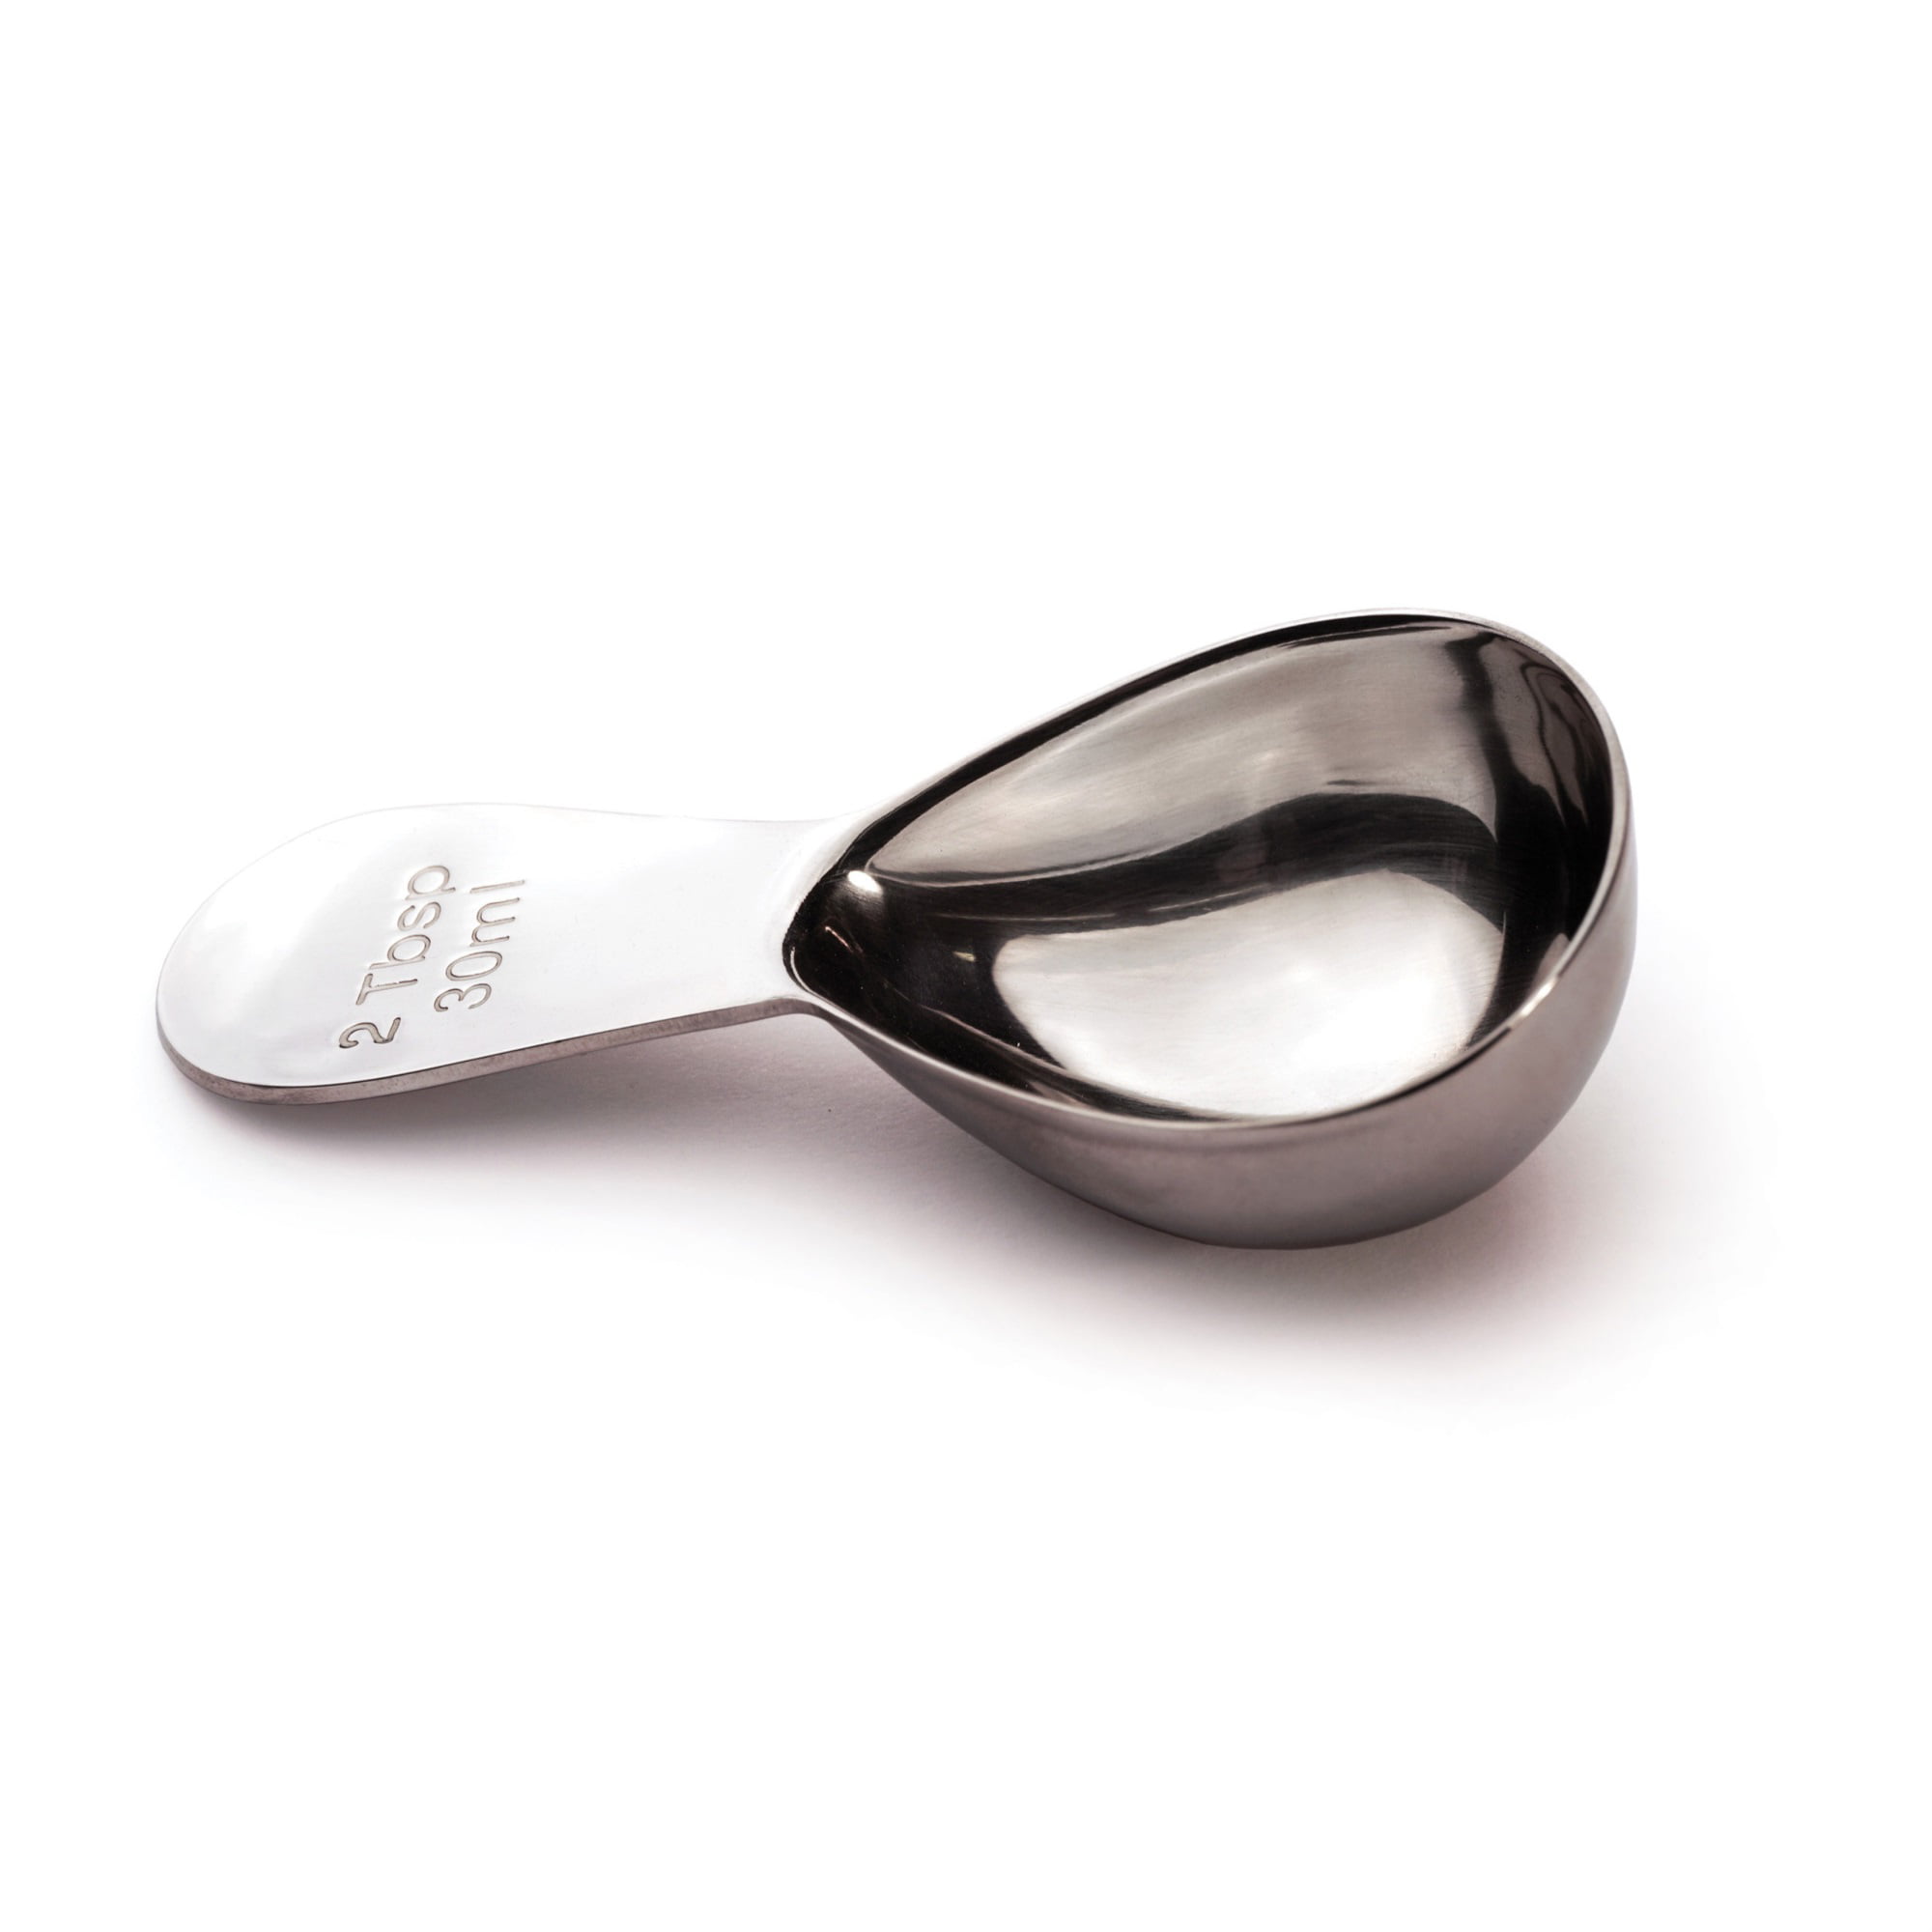 RSVP CS-2TB Coffee Scoop Measure 2 TBL 1/8 Cup 4" Long 18/8 Stainless Steel  New 